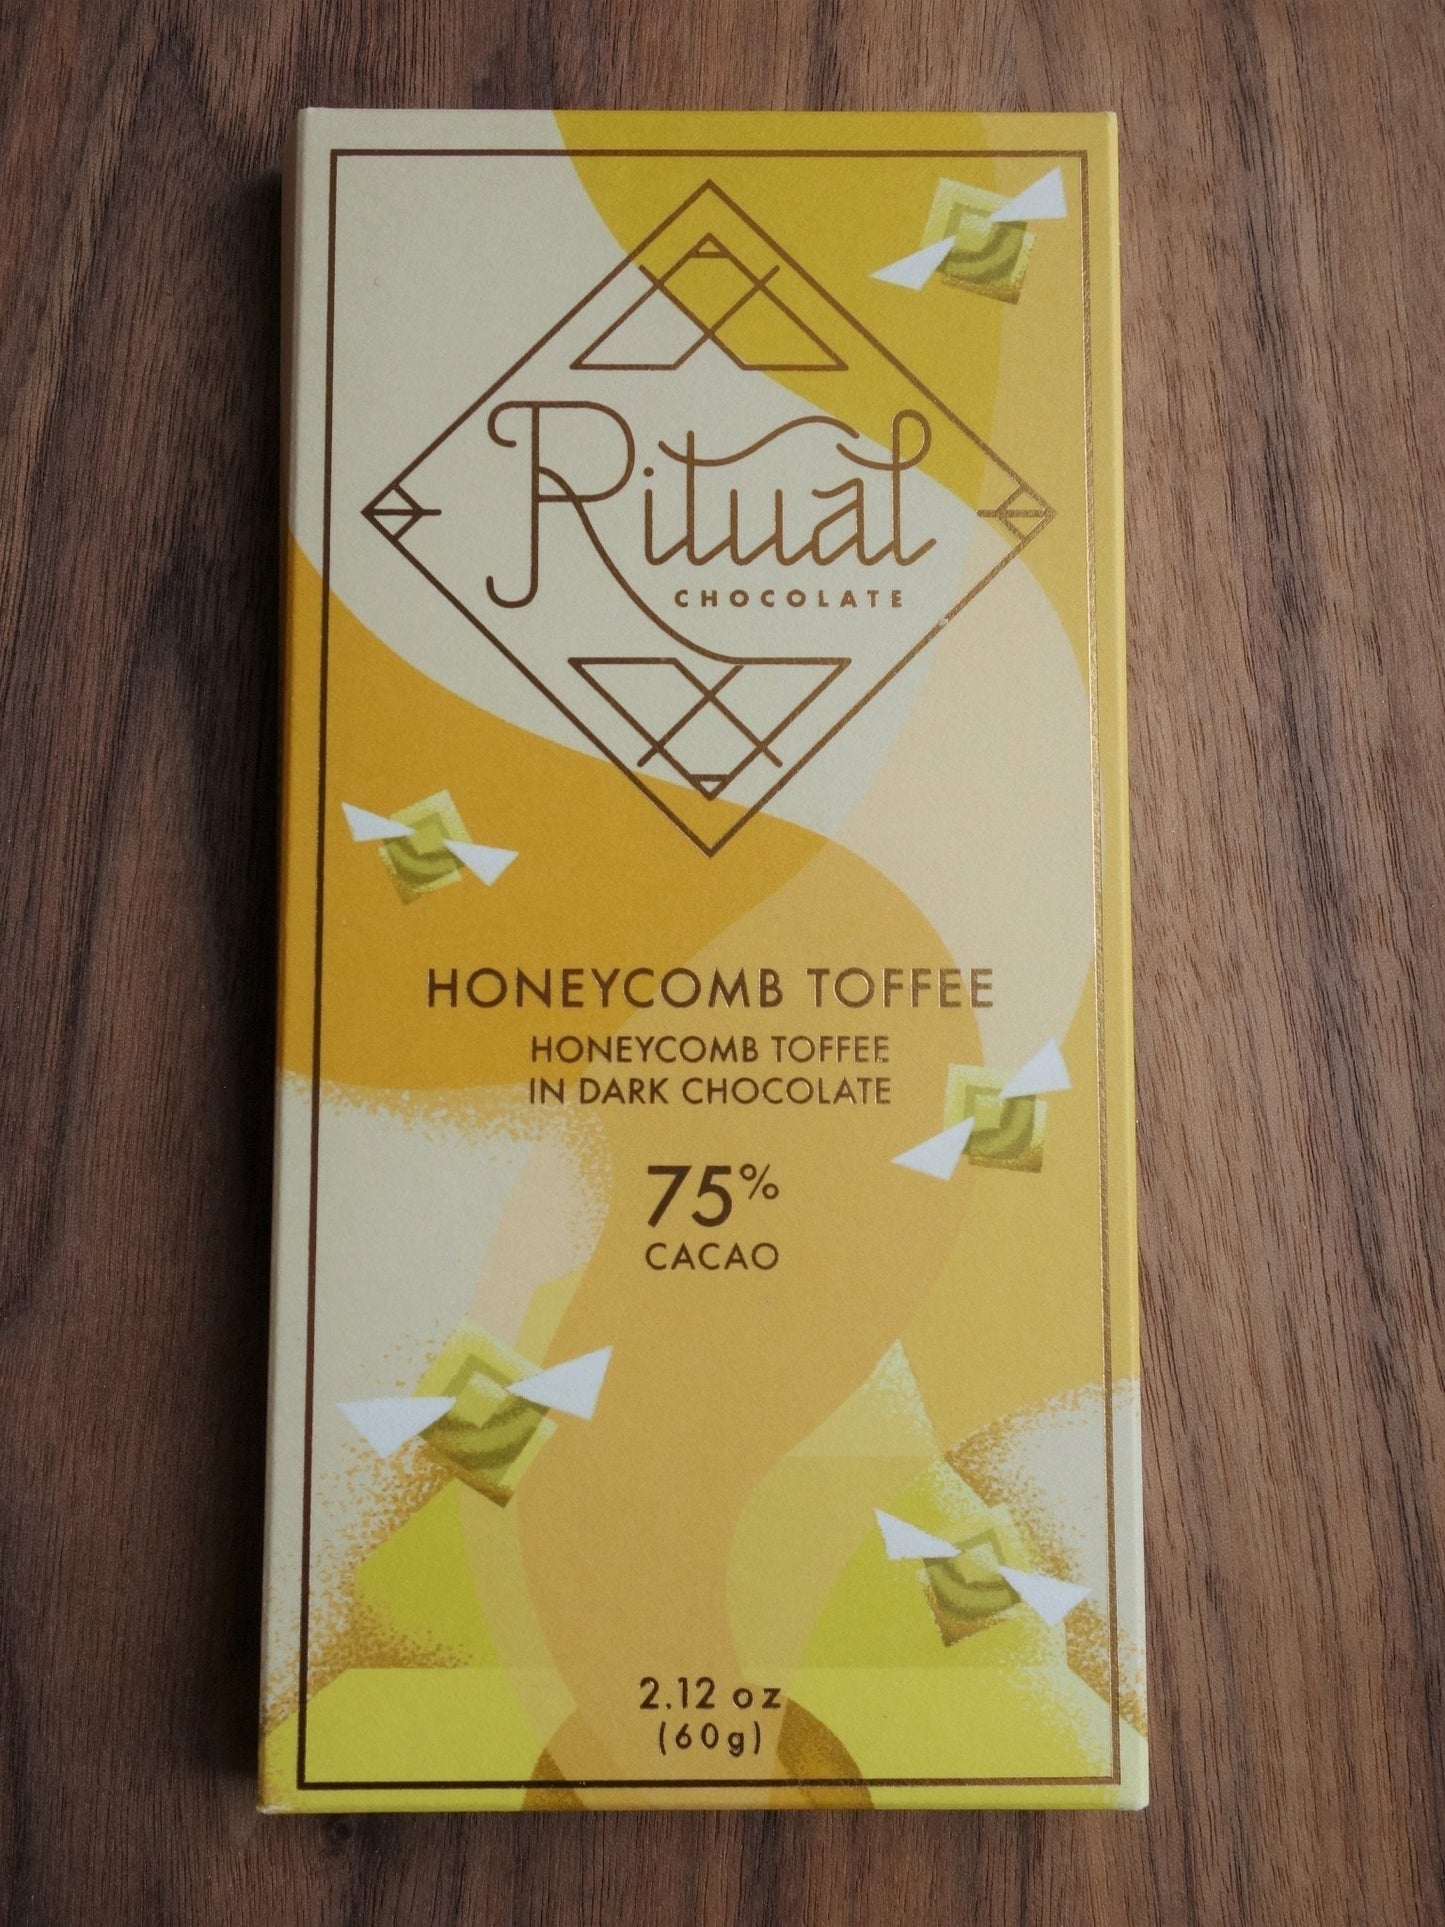 Ritual Honeycomb Toffee Bar 70% - Mongers' Provisions